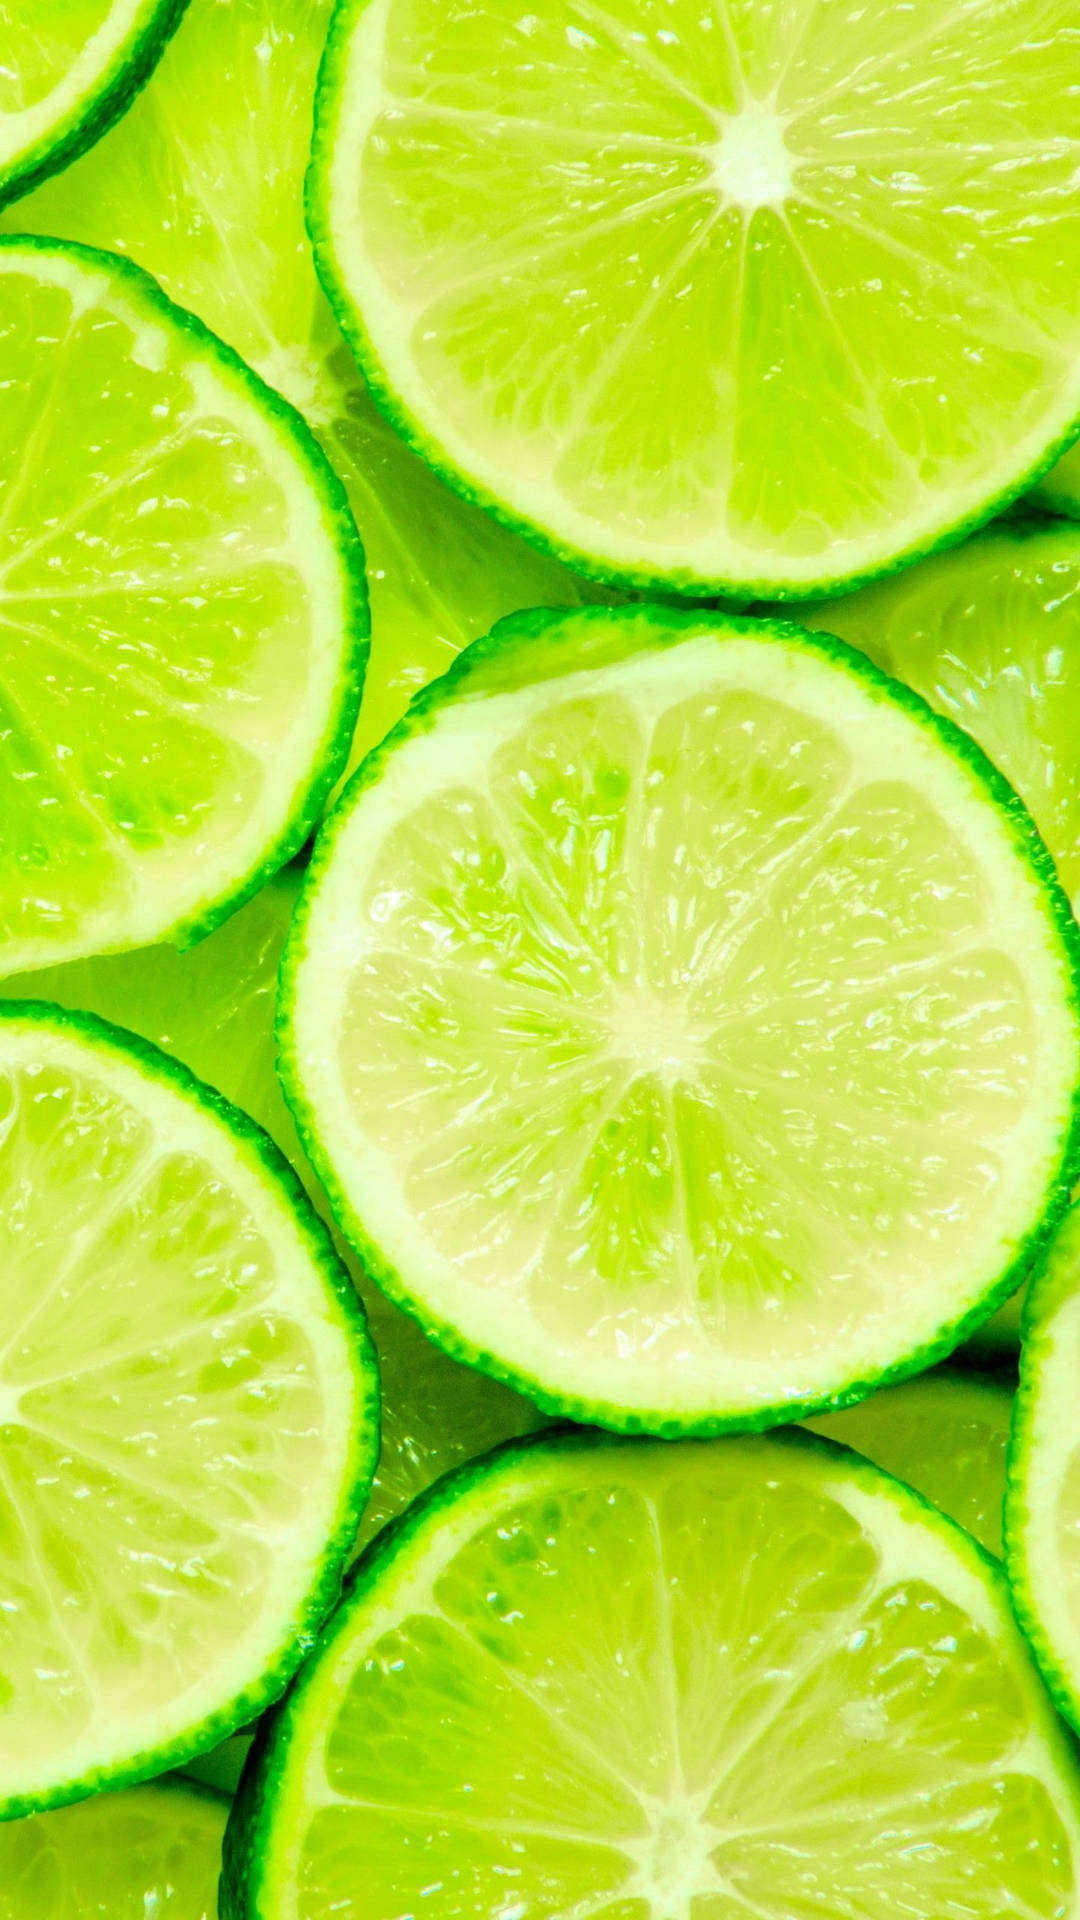 Green Aesthetic Tumblr Lime Slices